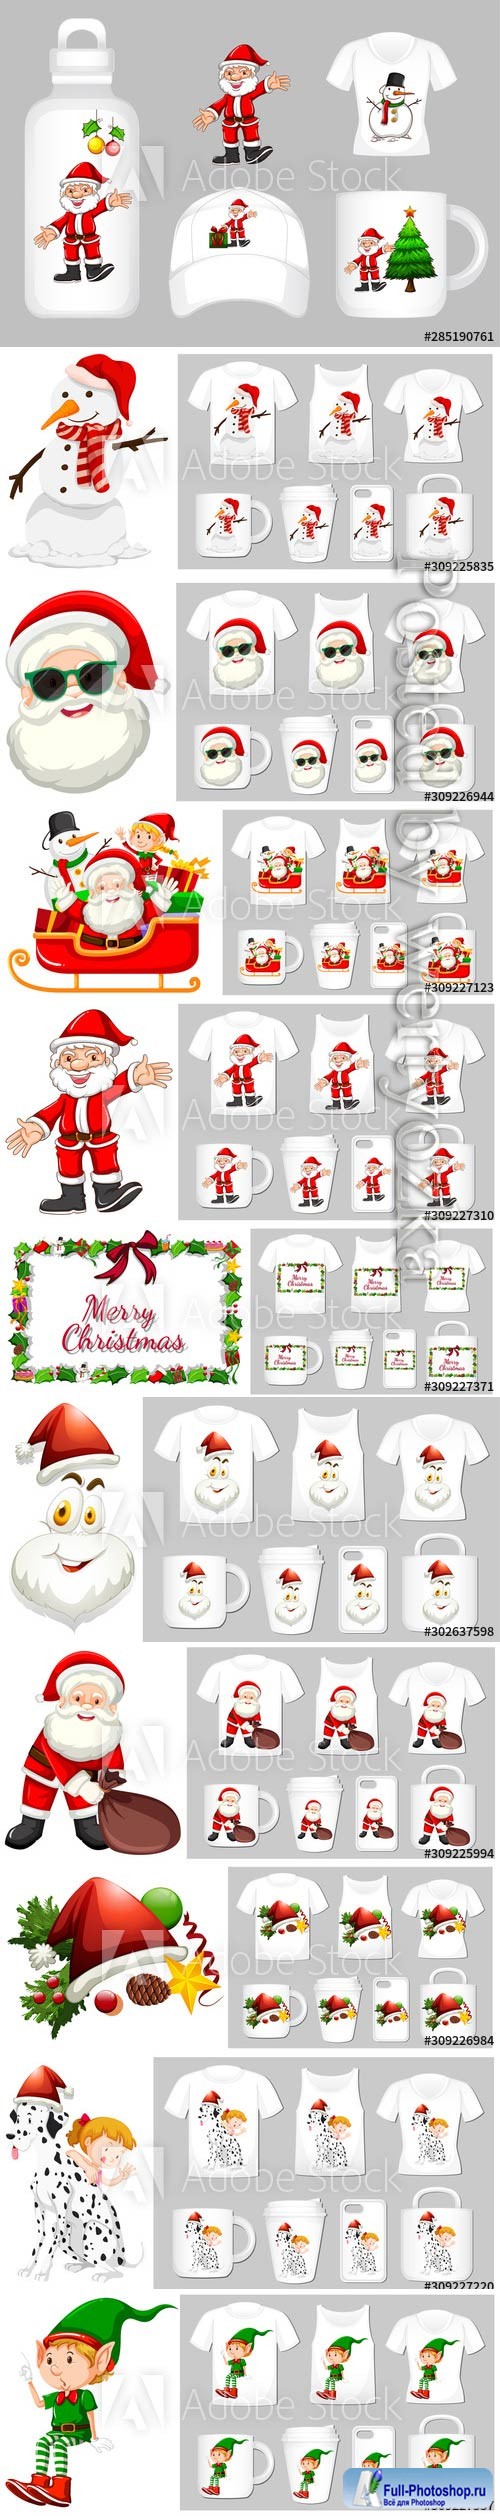 Christmas theme with ornaments on many products